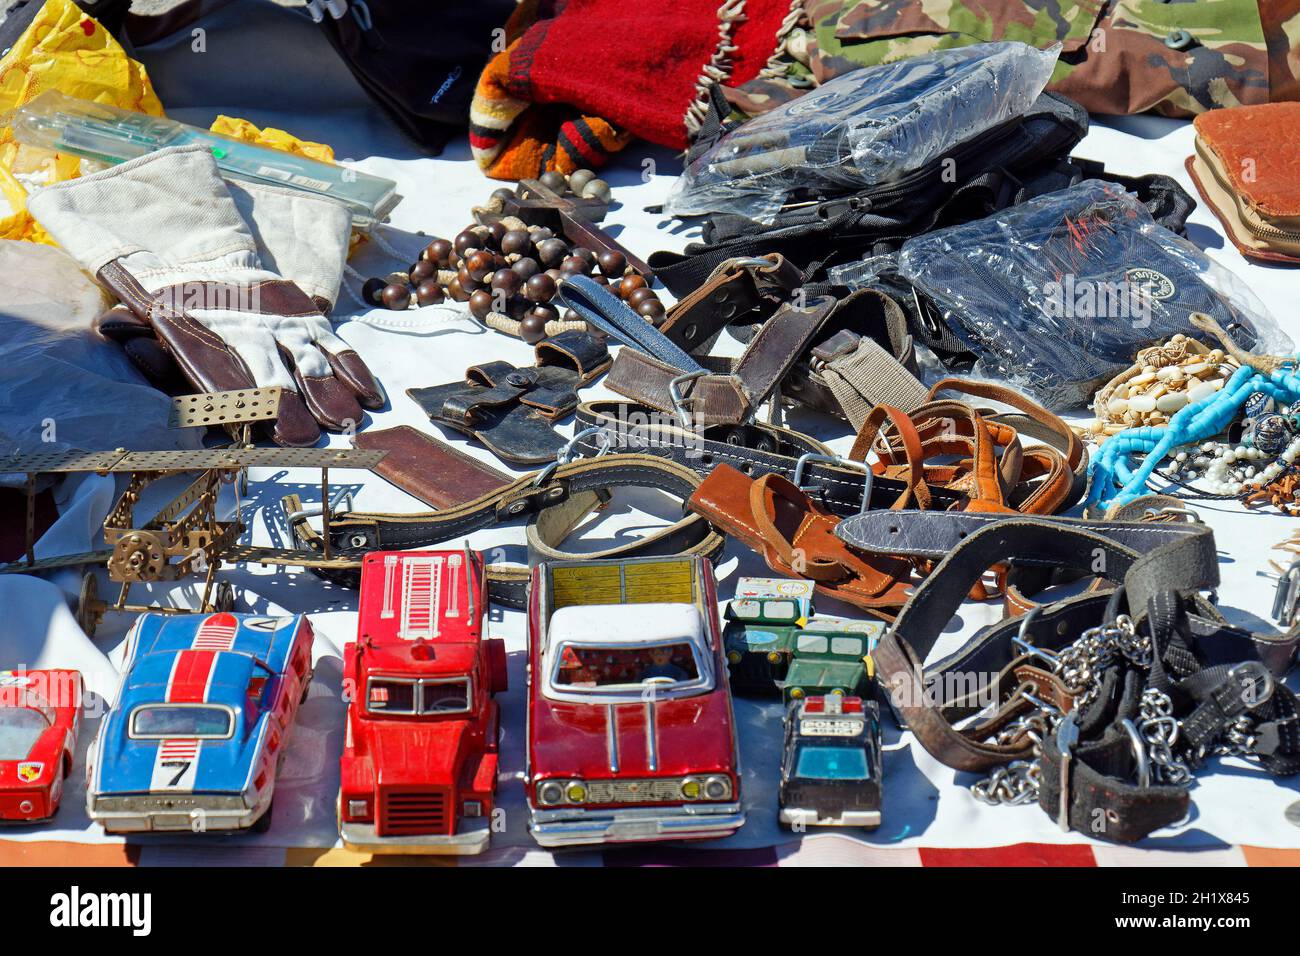 Belgrade, Serbia - May 29, 2021: Old retro toy cars and other collectible items memorabilia sold on flea market in Belgrade for collectors. Stock Photo